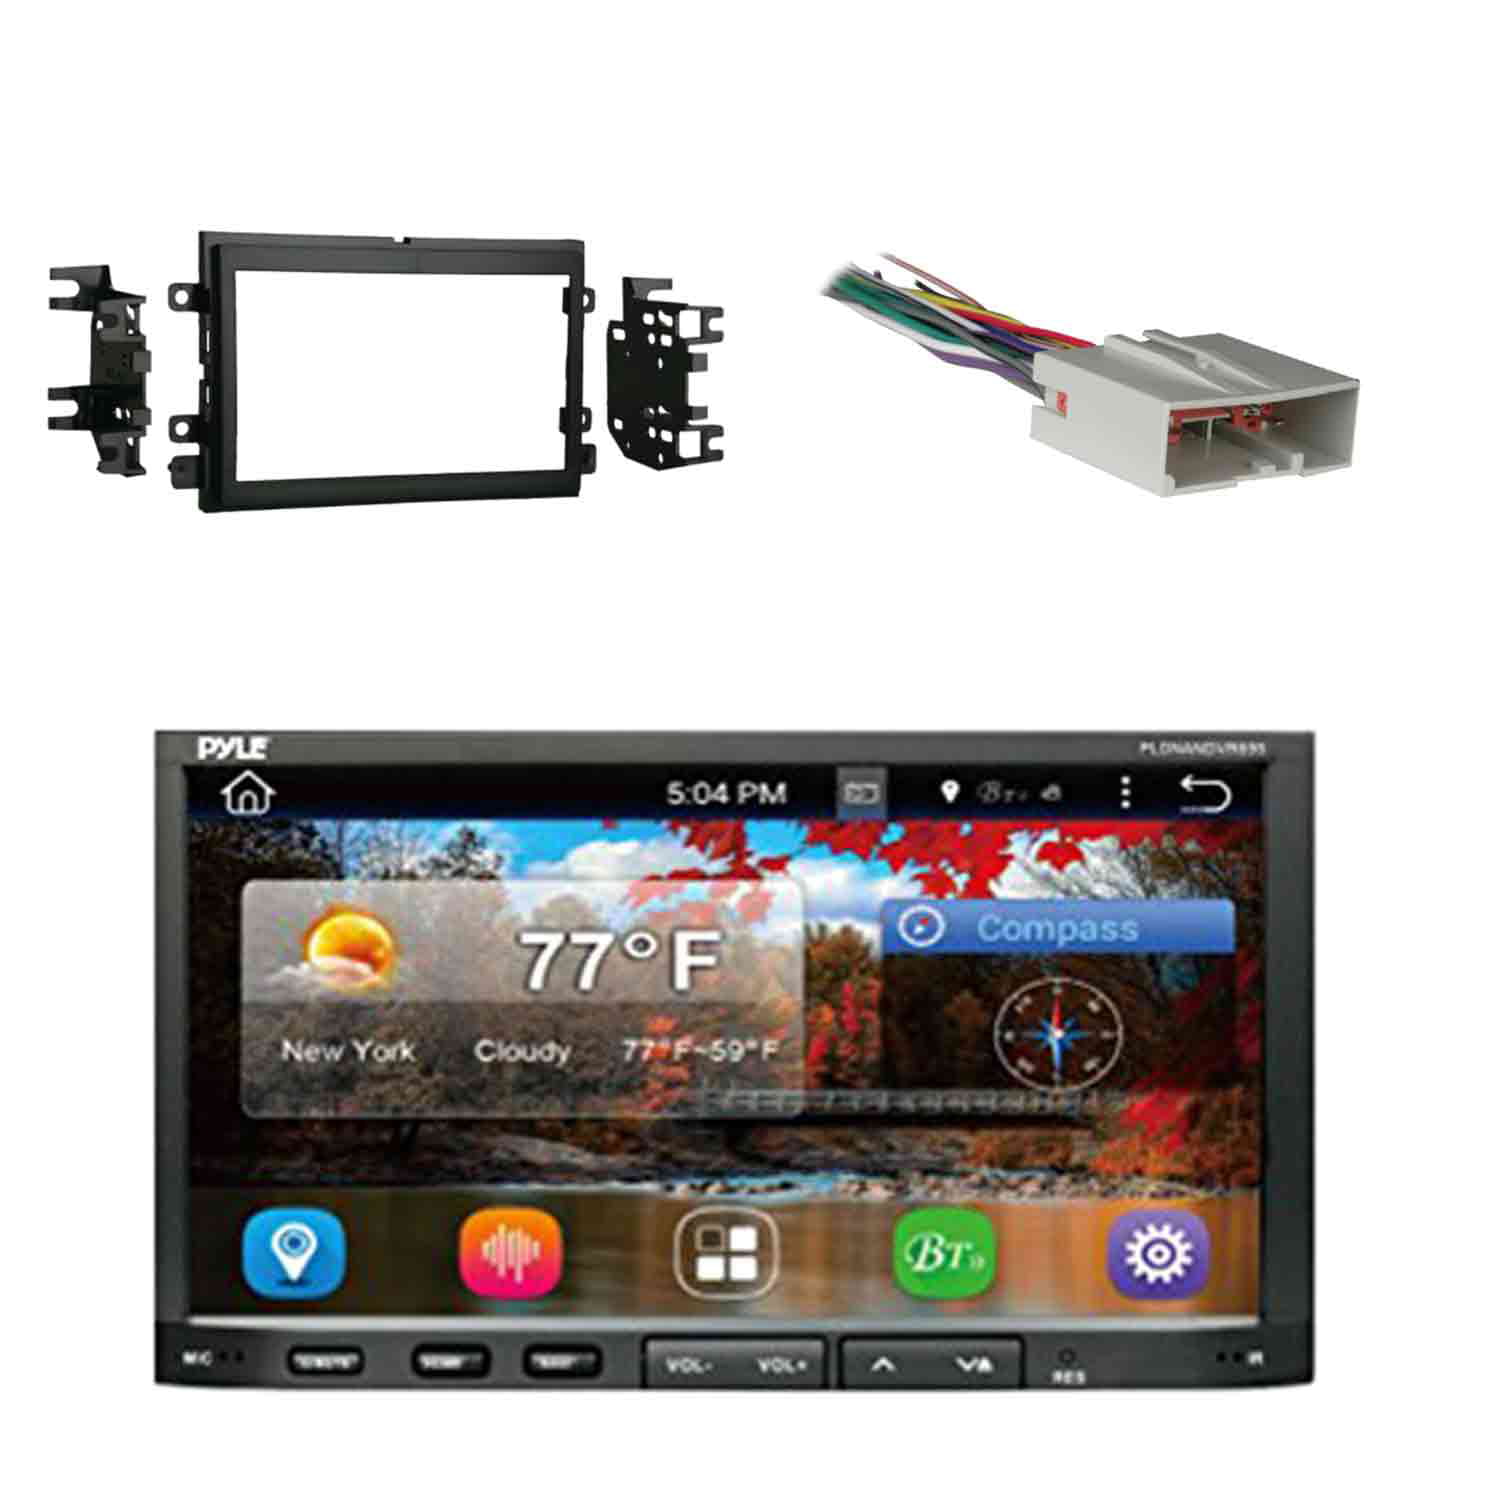 Metra Double DIN Dash Kit for Select 2004-Up Ford Mercury95-5812 Lincoln